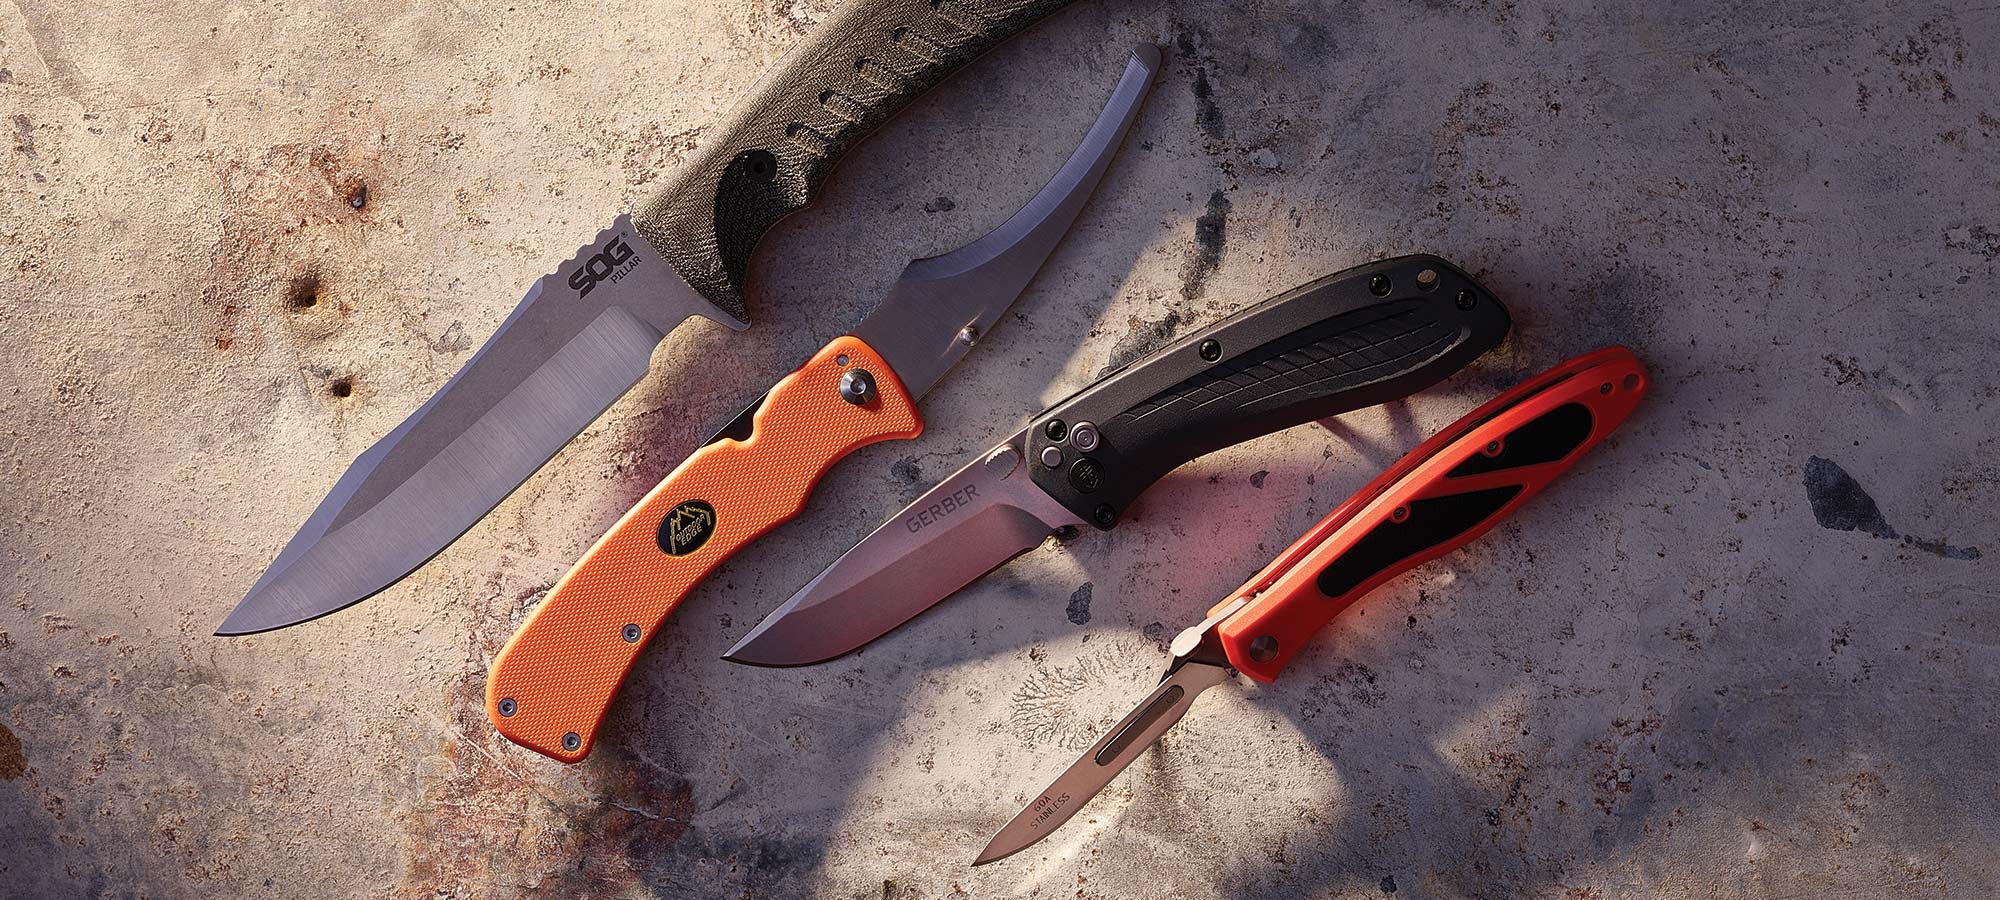 new hunting knives gear test